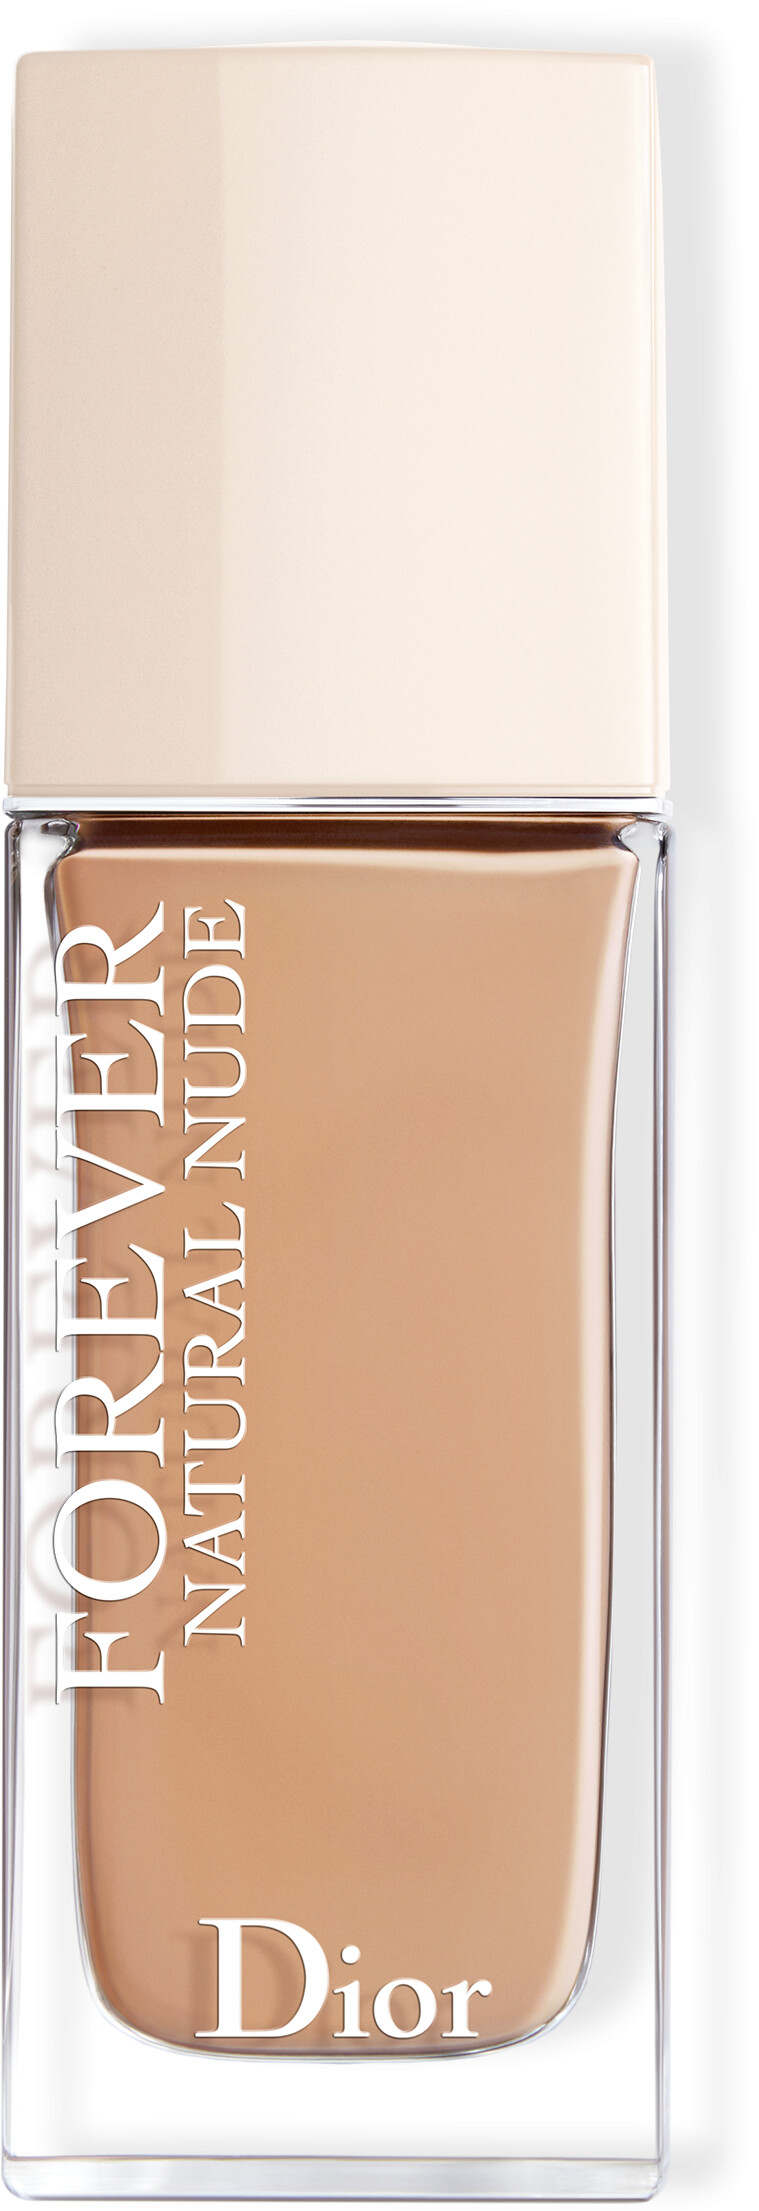 DIOR Forever Natural Nude Foundation 30ml 3,5N - Neutral